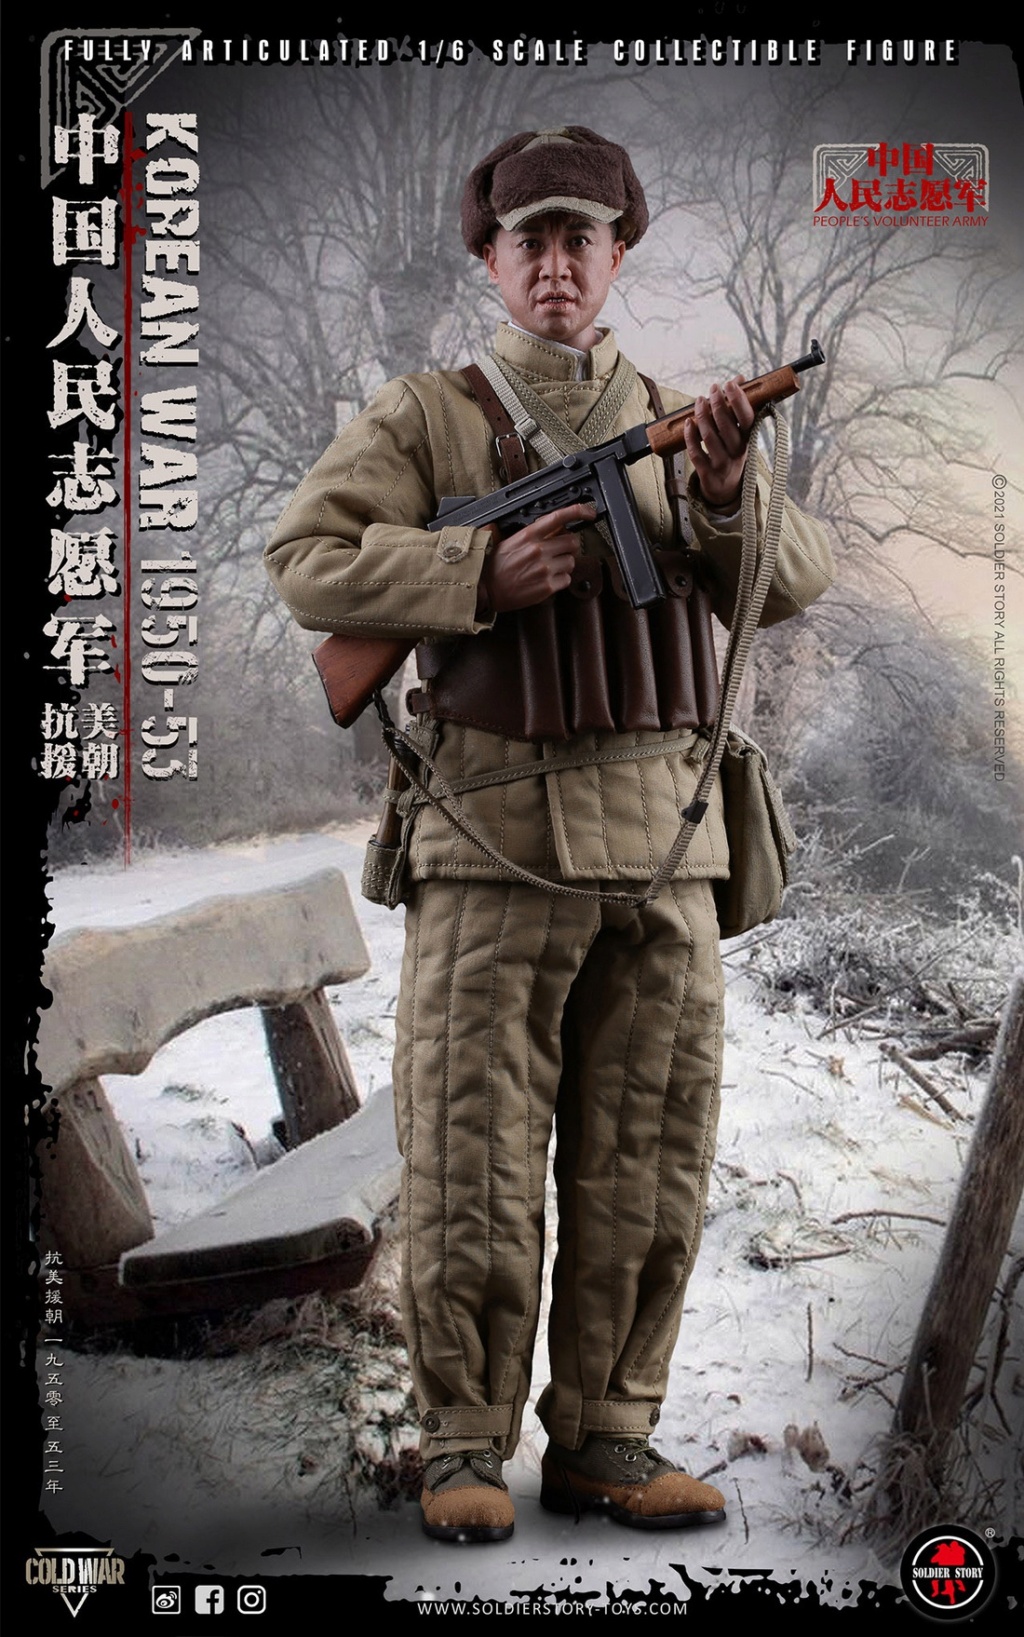 Soldierstory - NEW PRODUCT: SOLDIER STORY: 1/6 Chinese People’s Volunteers 1950-53 Collectible Action Figure (#SS-124) Ddbcb110